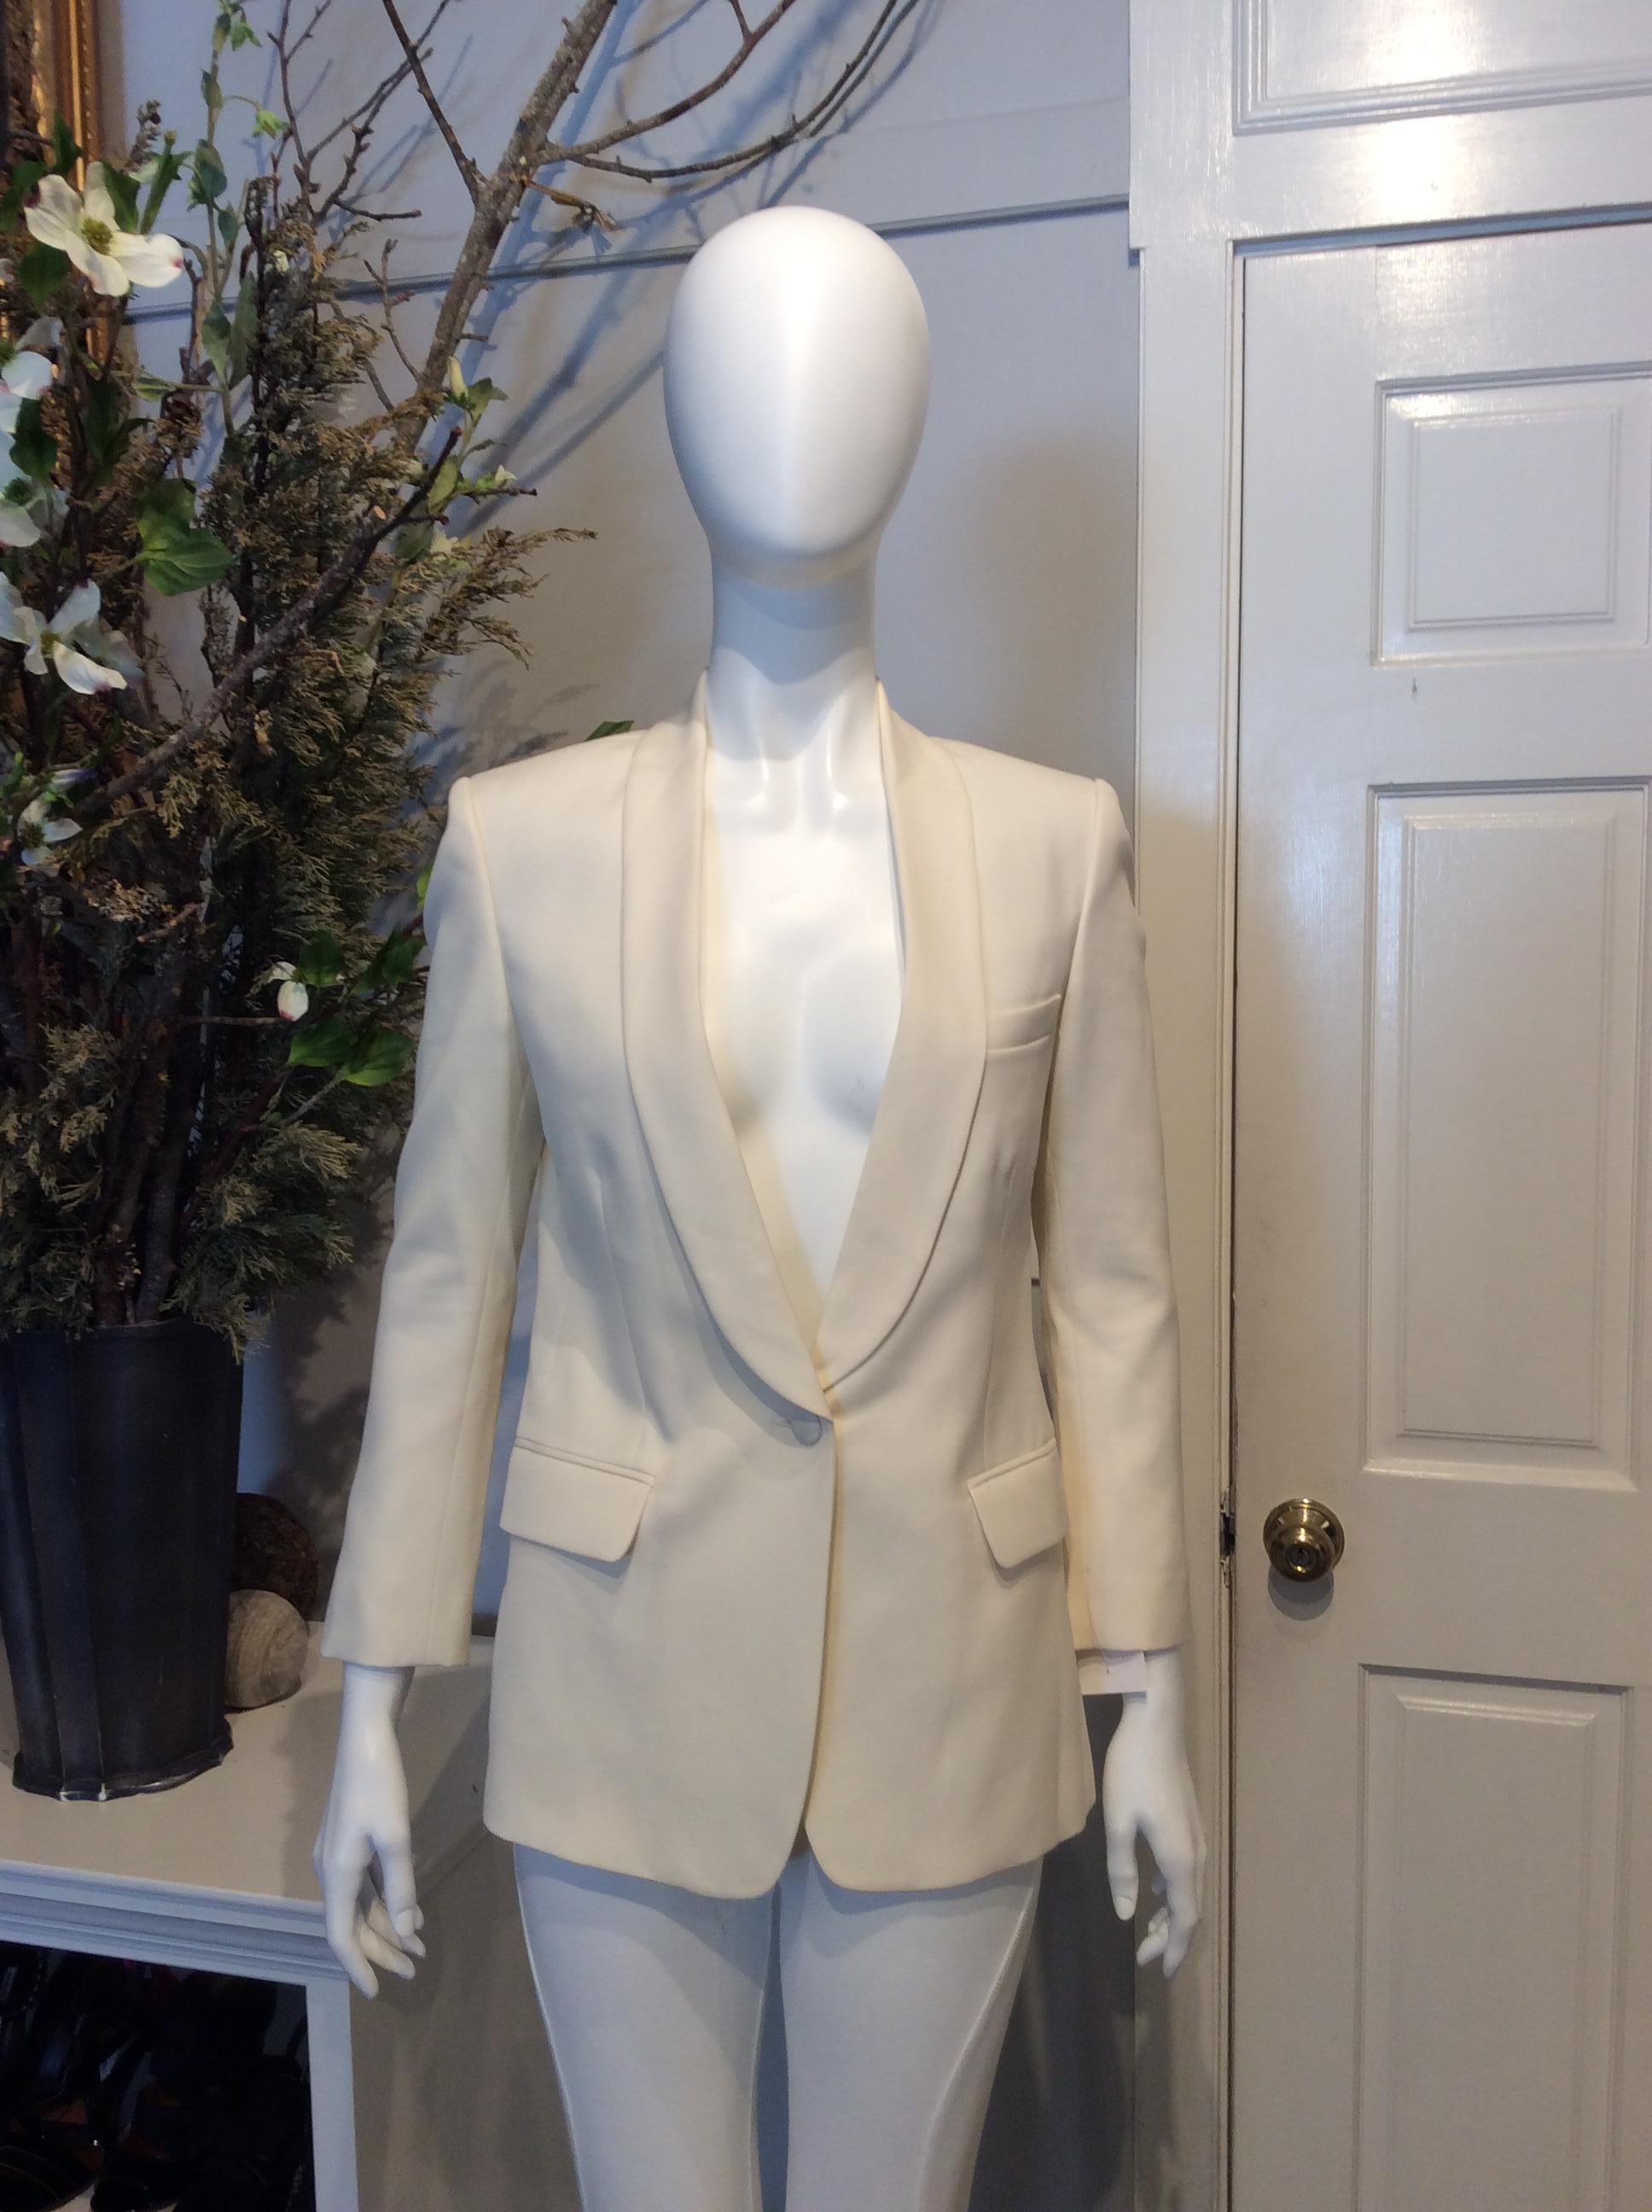 Ivory Balmain wool blazer. Tuxedo lapels. Single button closure at front. Dual pockets at front. Three concealed interior pockets. Chest pocket at front. Three buttons at each cuff. Vent at back. Includes an extra set of buttons.

Sizing: Fr34,